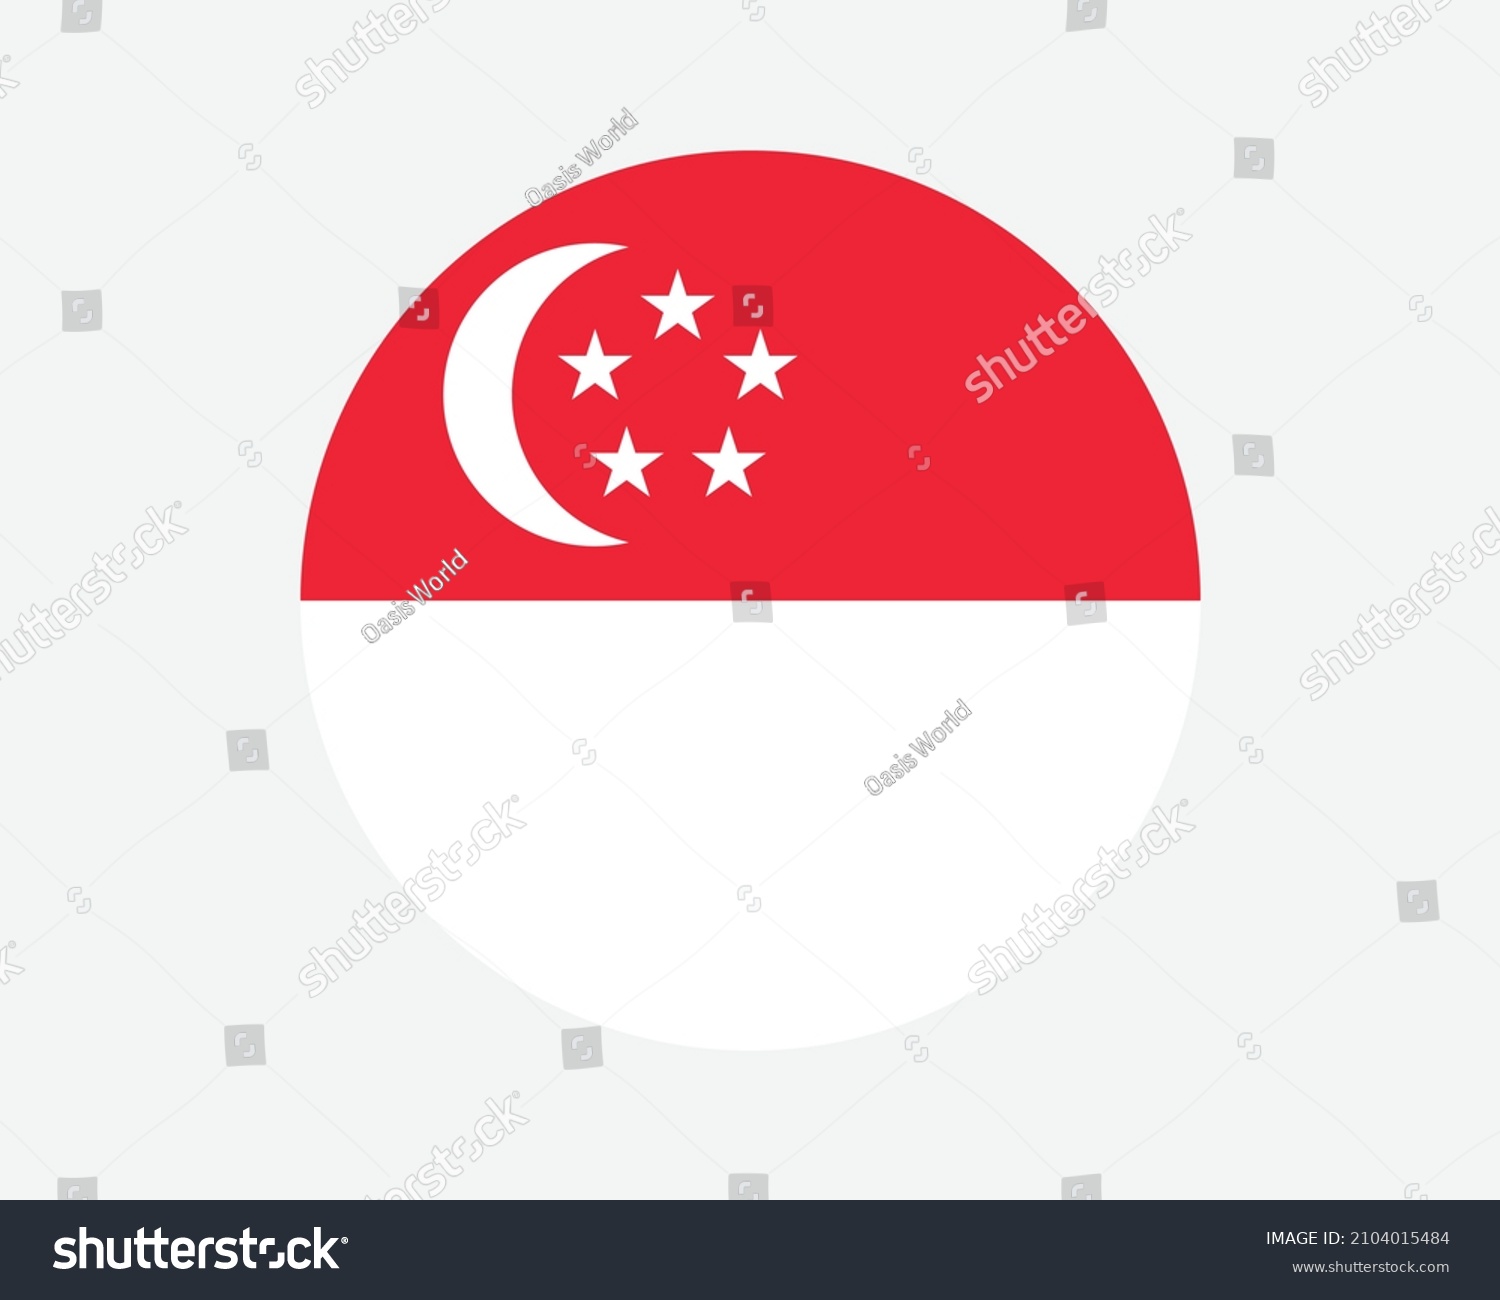 SVG of Singapore Round Country Flag. Singaporean Circle National Flag. Republic of Singapore Circular Shape Button Banner. EPS Vector Illustration. svg